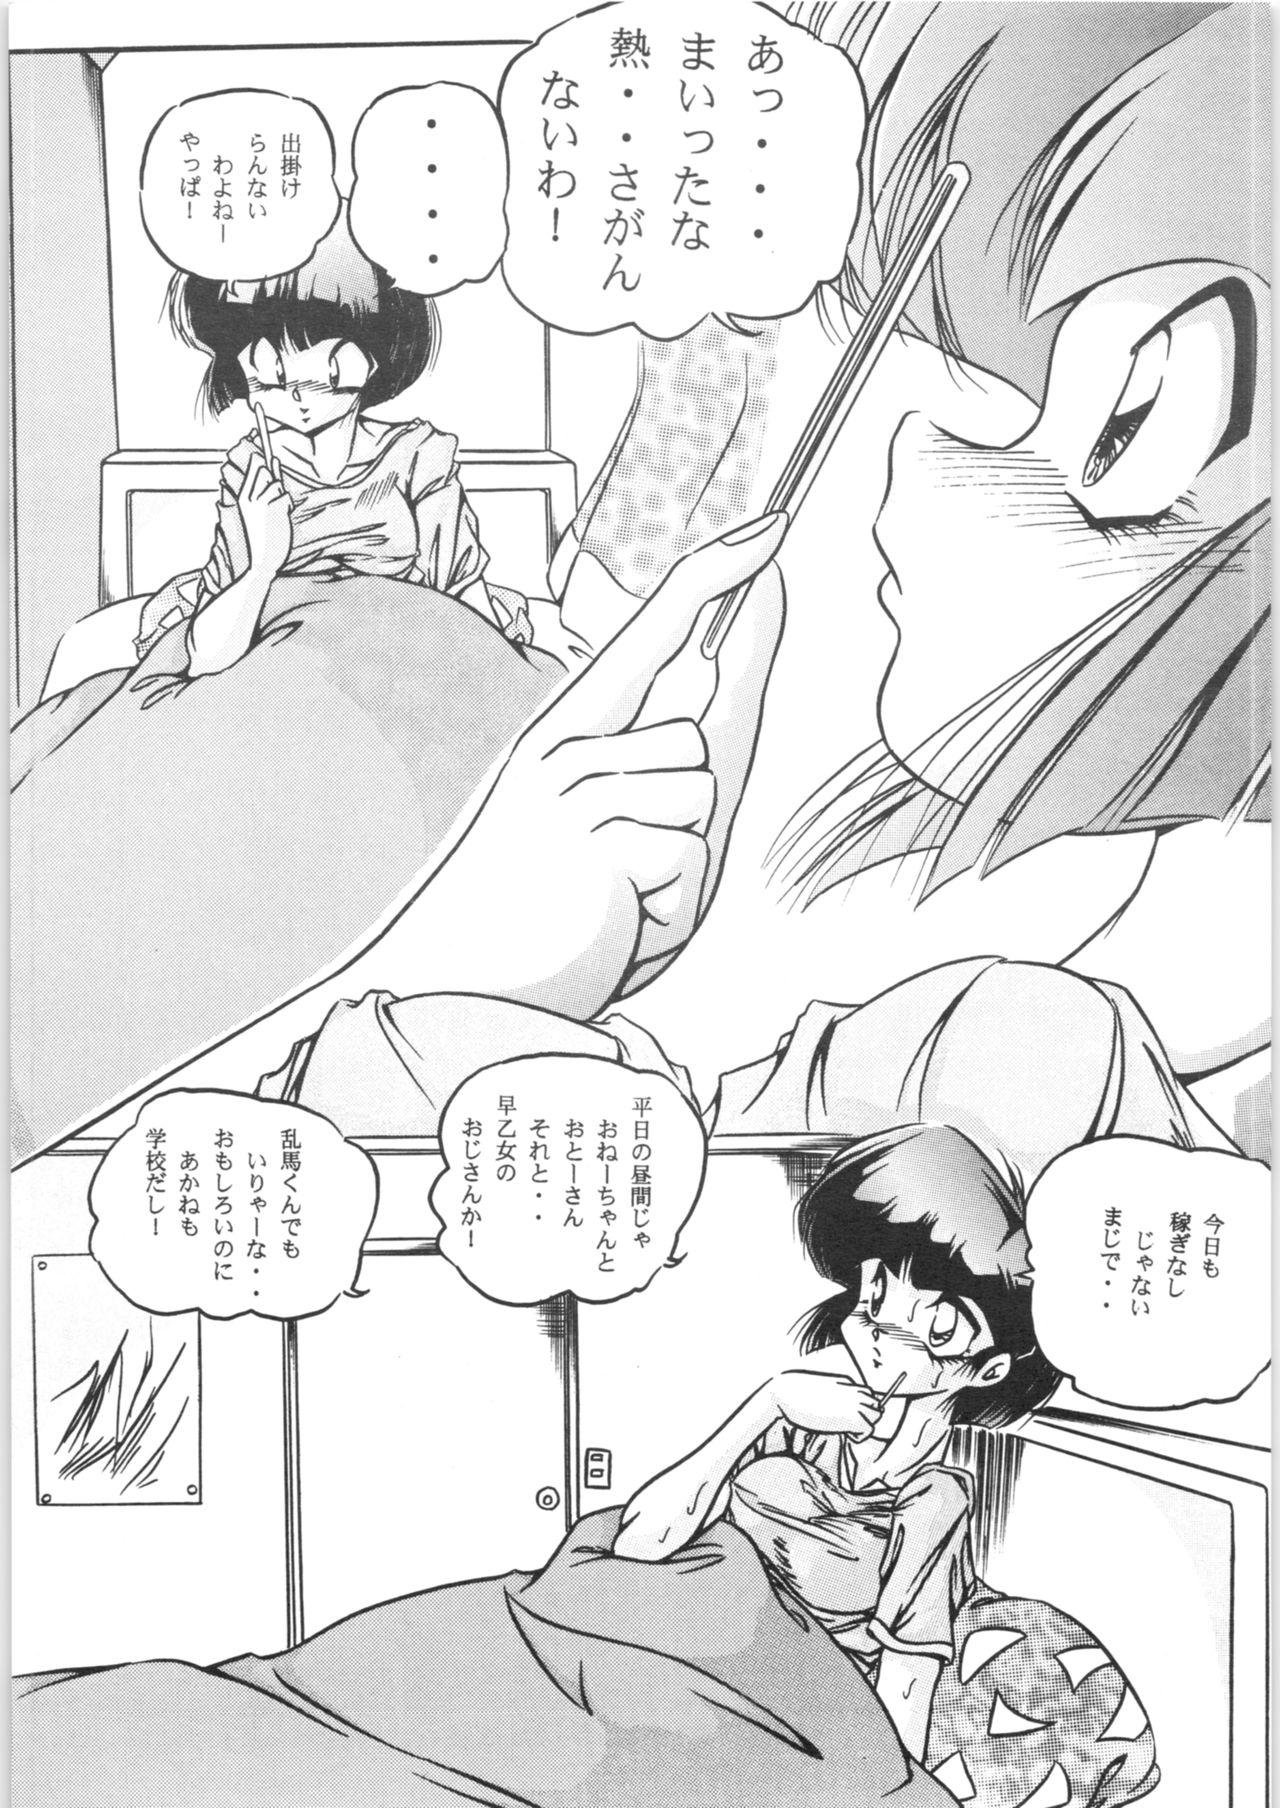 Blackdick C-COMPANY SPECIAL STAGE 18 - Ranma 12 Idol project Sex Pussy - Page 8